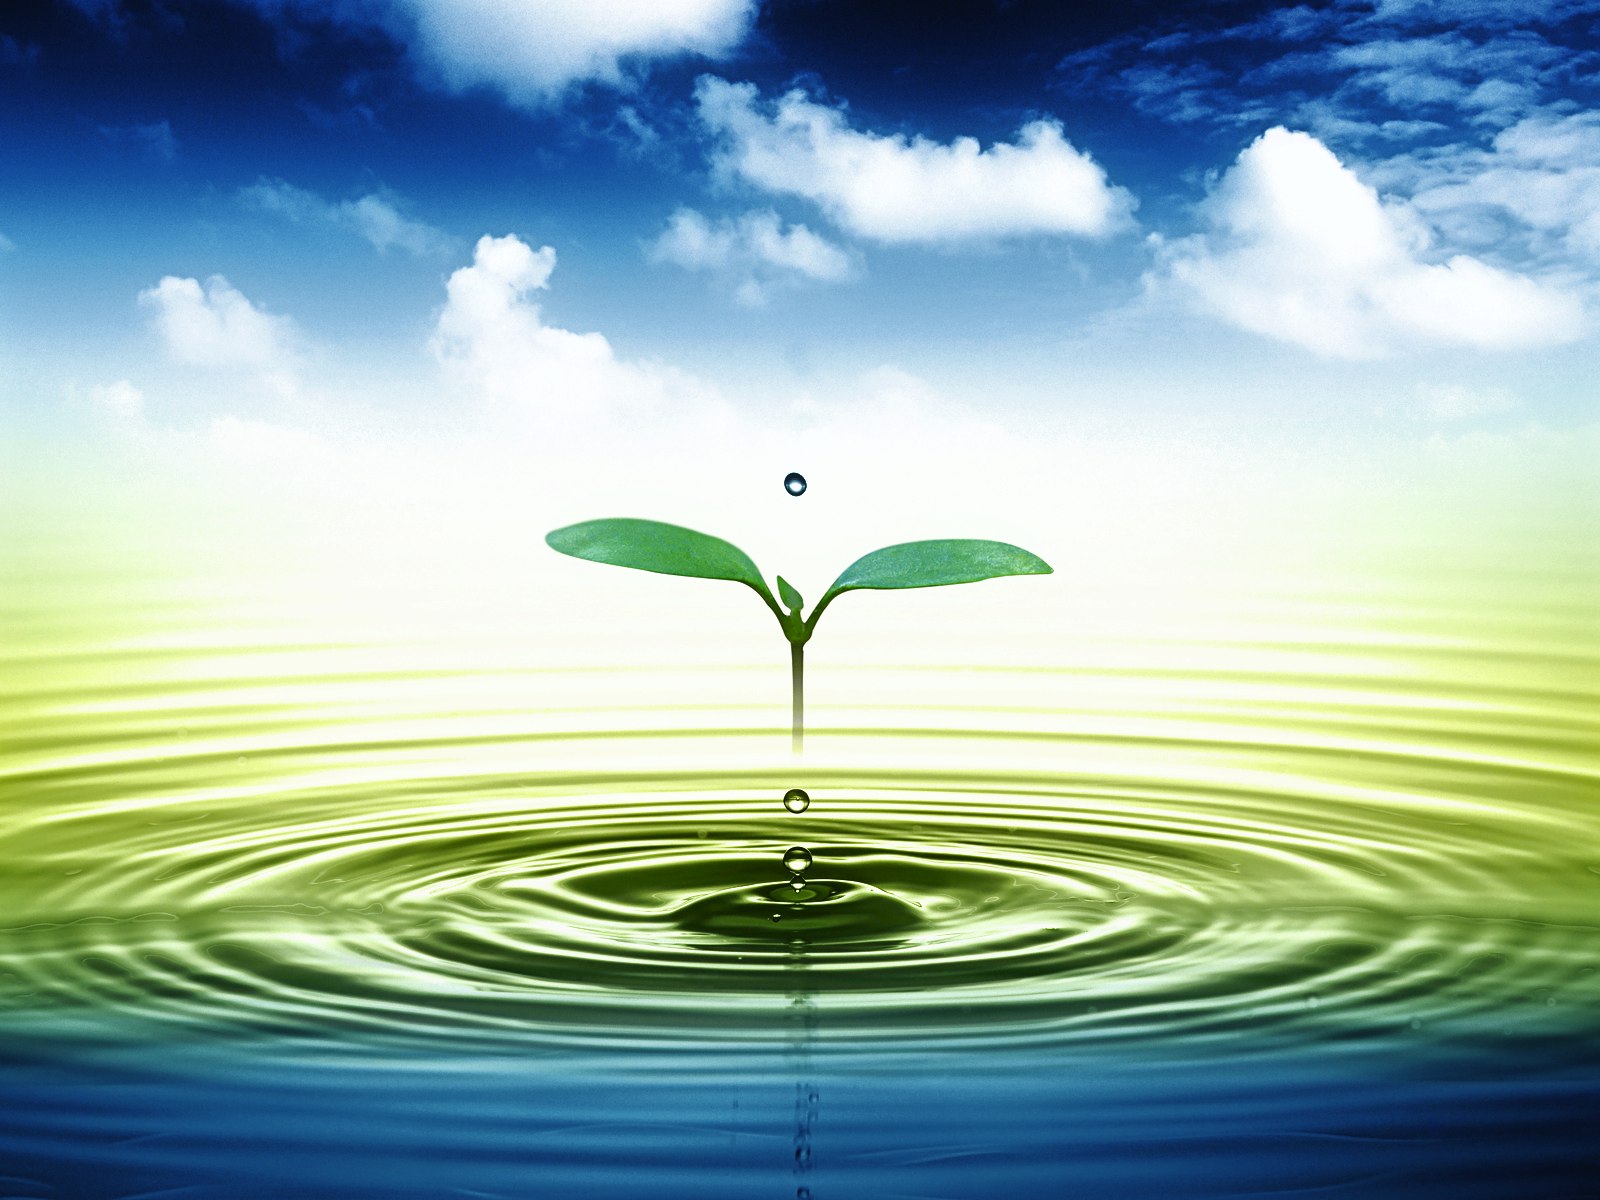 water 3d live wallpaper,water resources,water,nature,sky,green